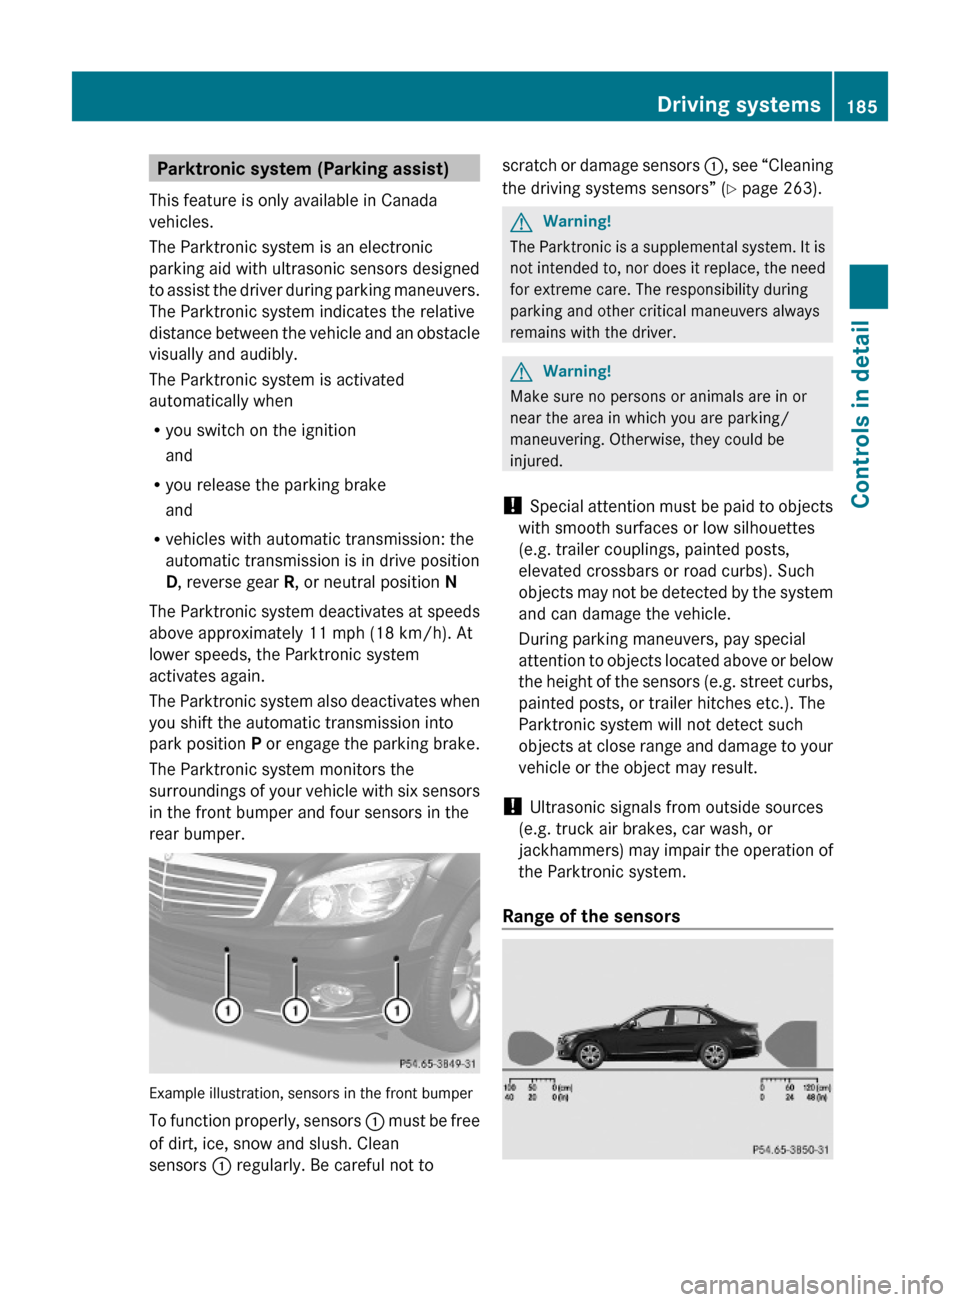 MERCEDES-BENZ C300 4MATIC 2010 W204 Owners Manual Parktronic system (Parking assist)
This feature is only available in Canada
vehicles.
The Parktronic system is an electronic
parking aid with ultrasonic sensors designed
to assist the driver during pa